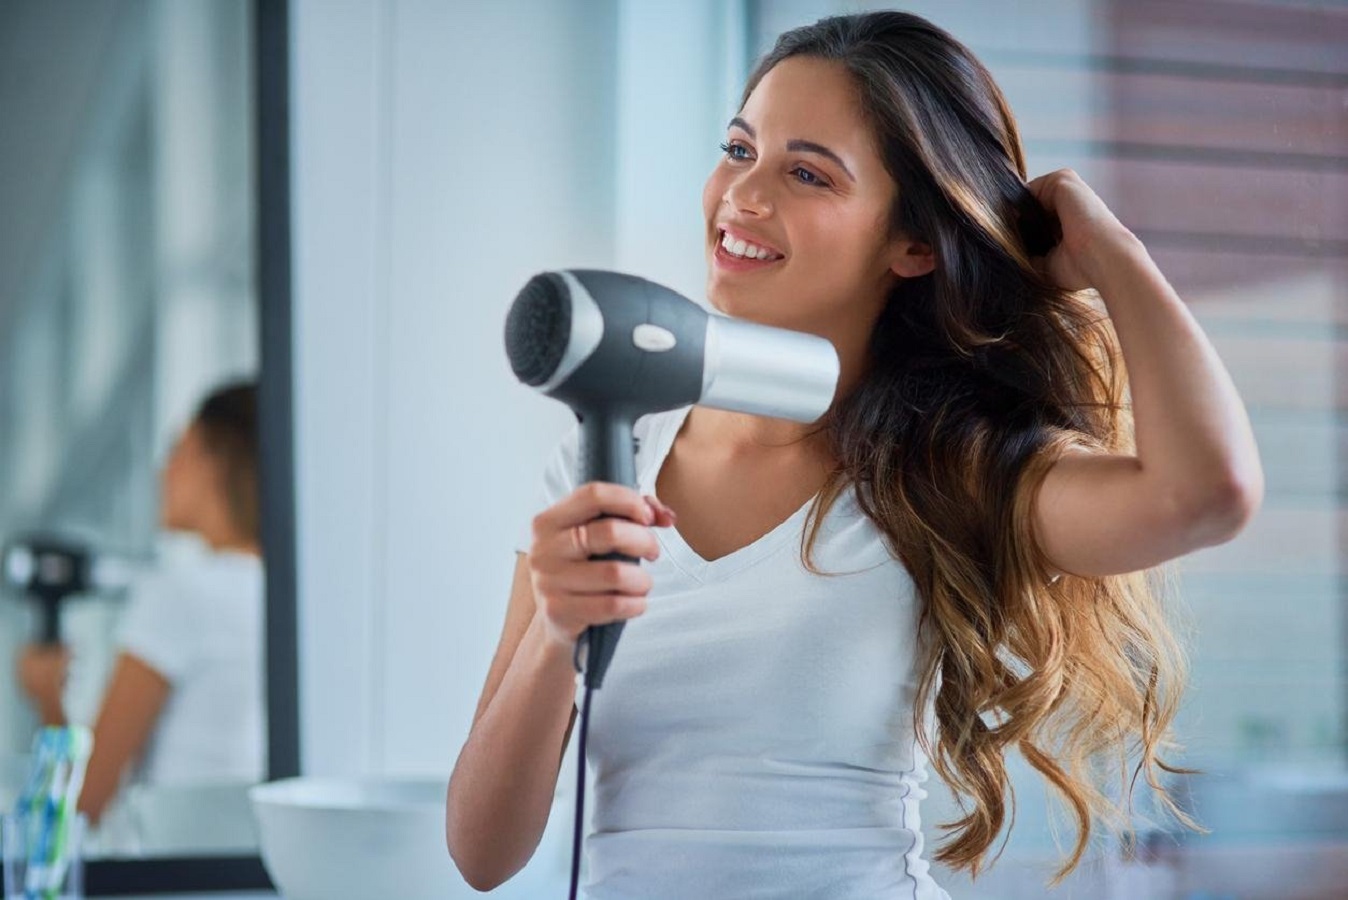 4 Best Philips Hair Dryers for May 2022